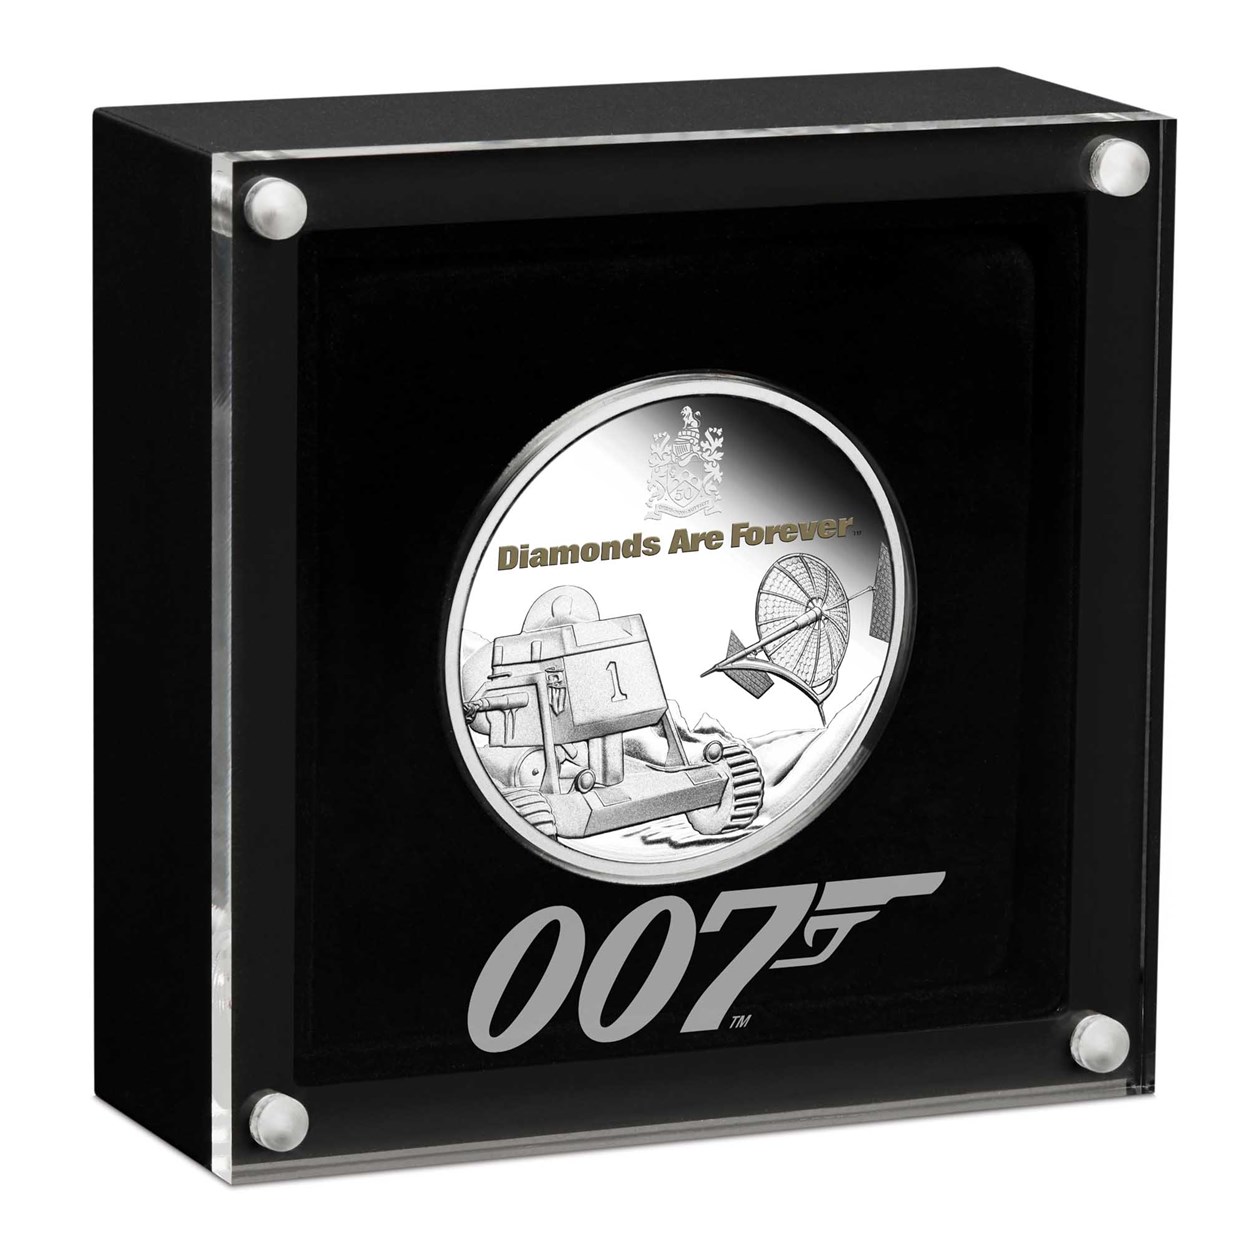 04 2021 James Bond Diamonds Are Forever 50thAnniversary 1oz Silver Proof Coin InCase HighRes